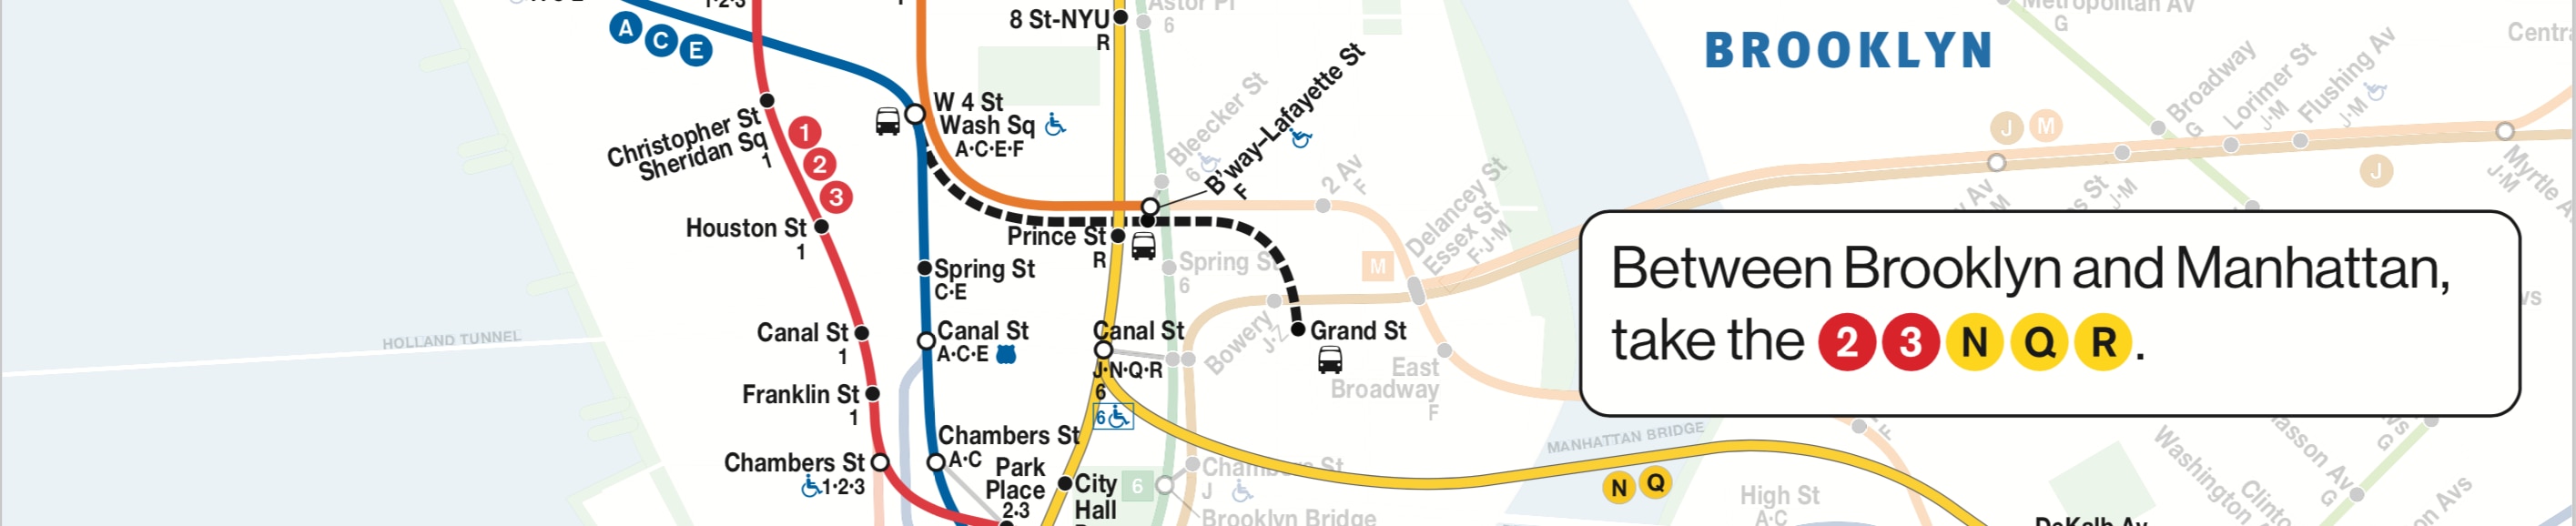 Subway map of alternate service options while there is no D in the Bronx, Manhattan and Brooklyn